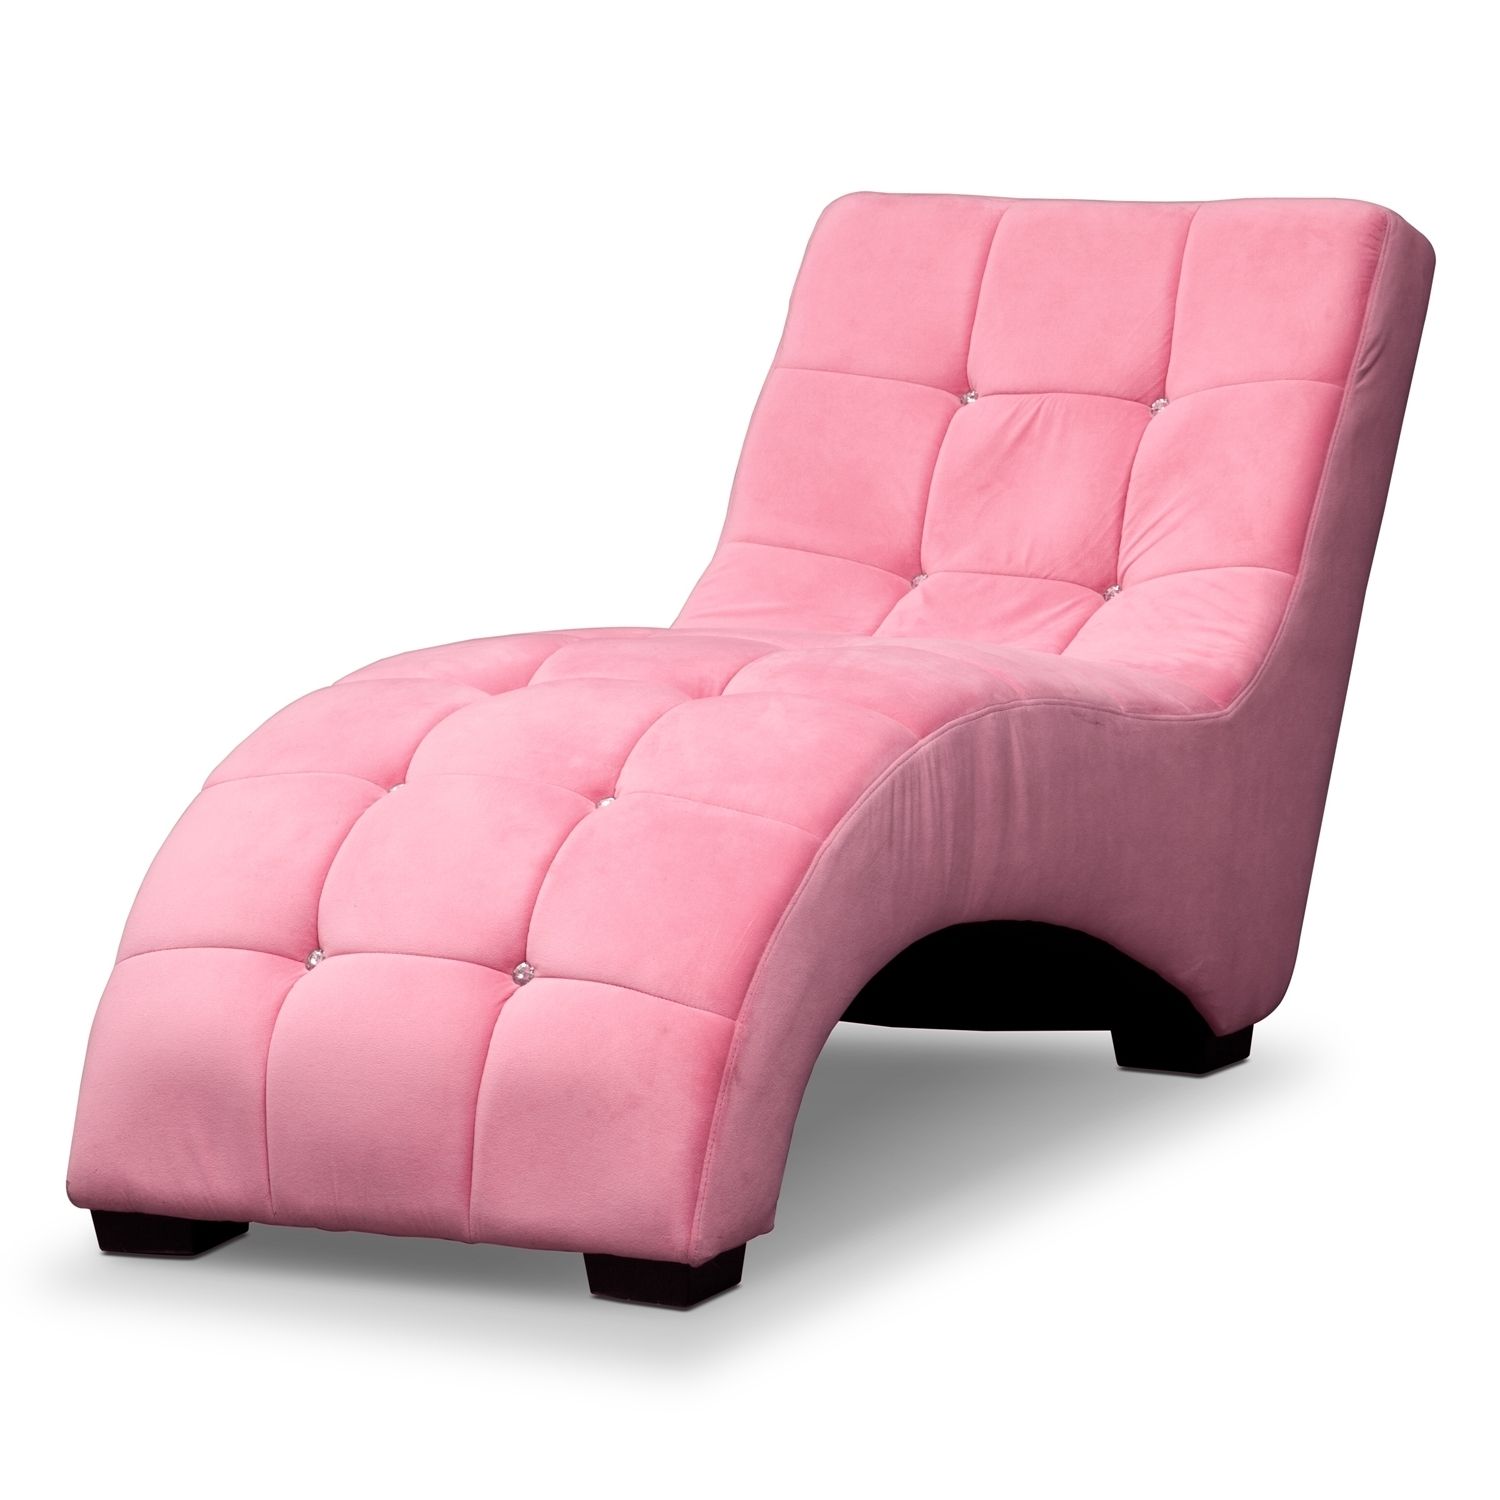 Royal Treatment. The Tufted, Pink Velvet Upholstery And Rhinestone Regarding Most Popular Pink Chaise Lounges (Photo 5 of 15)